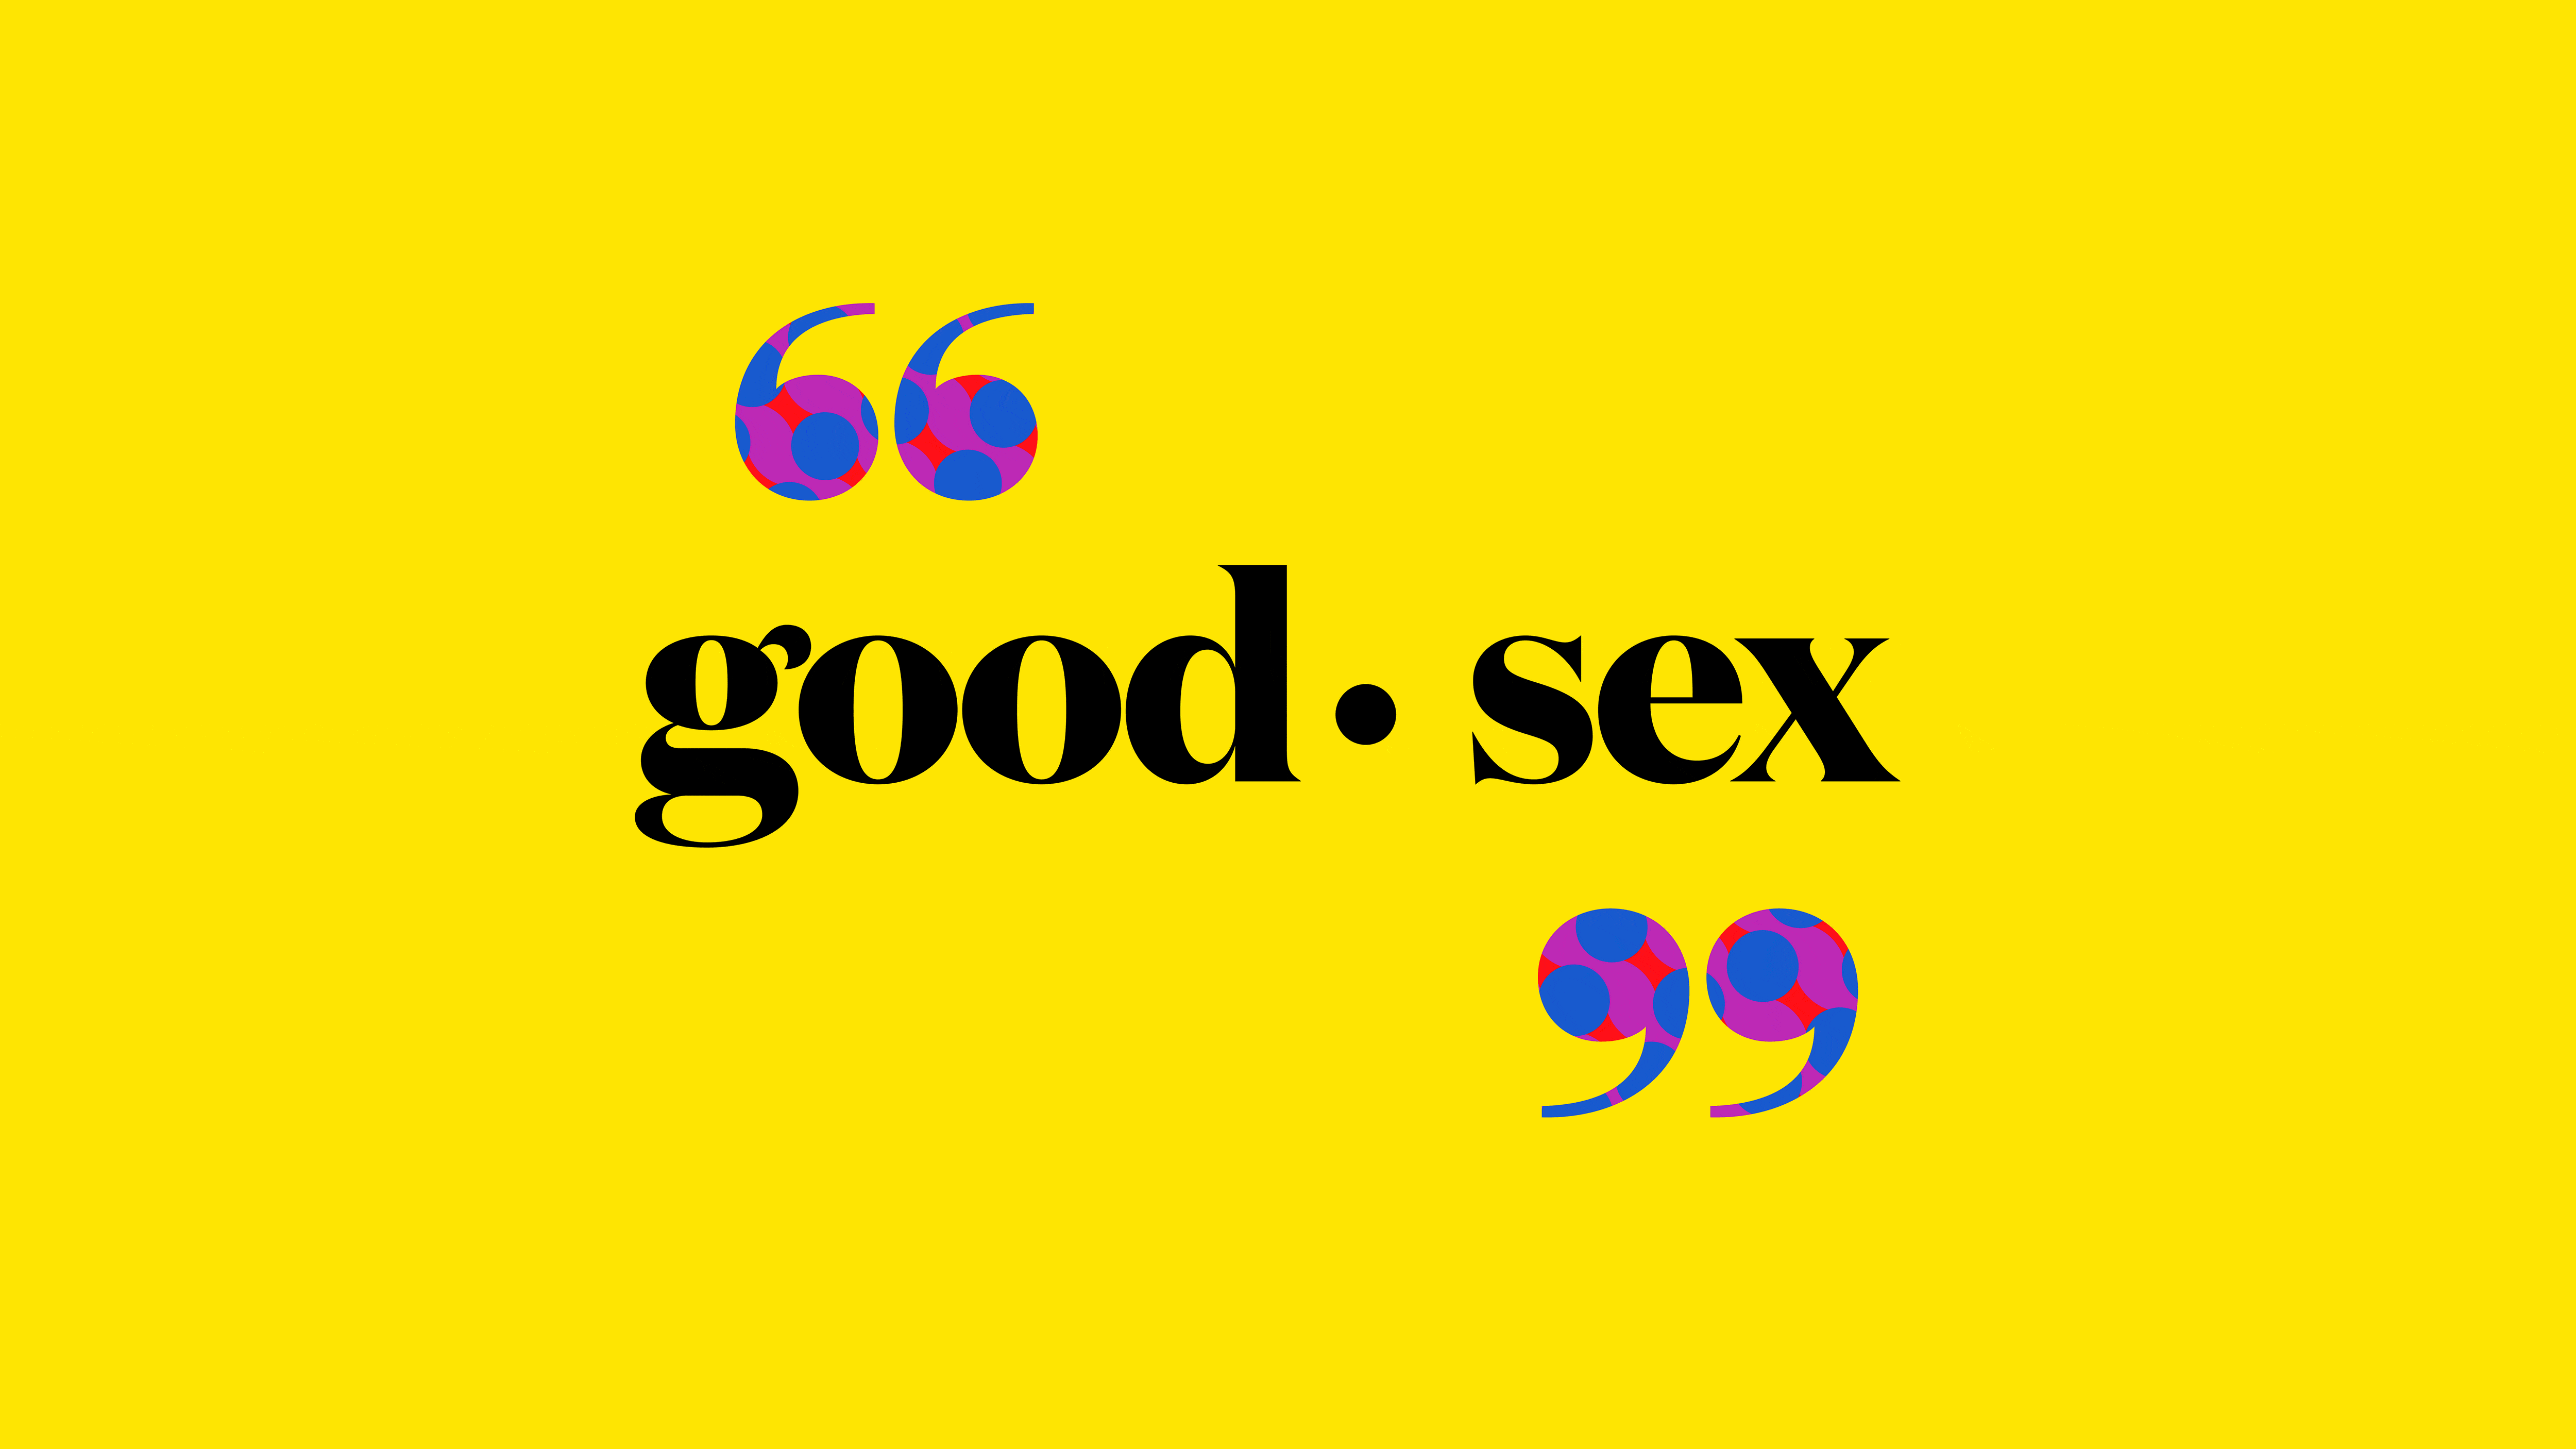 Whats your best type of sex